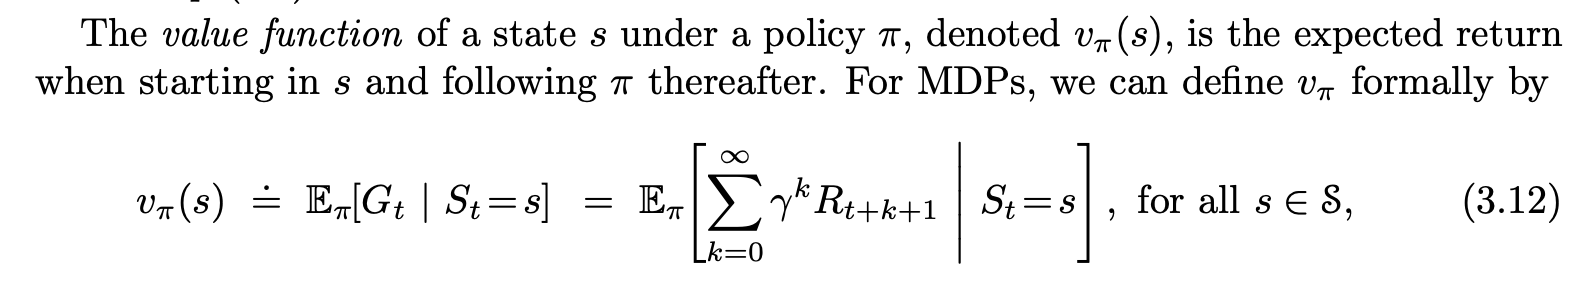 Bellman equation for state value